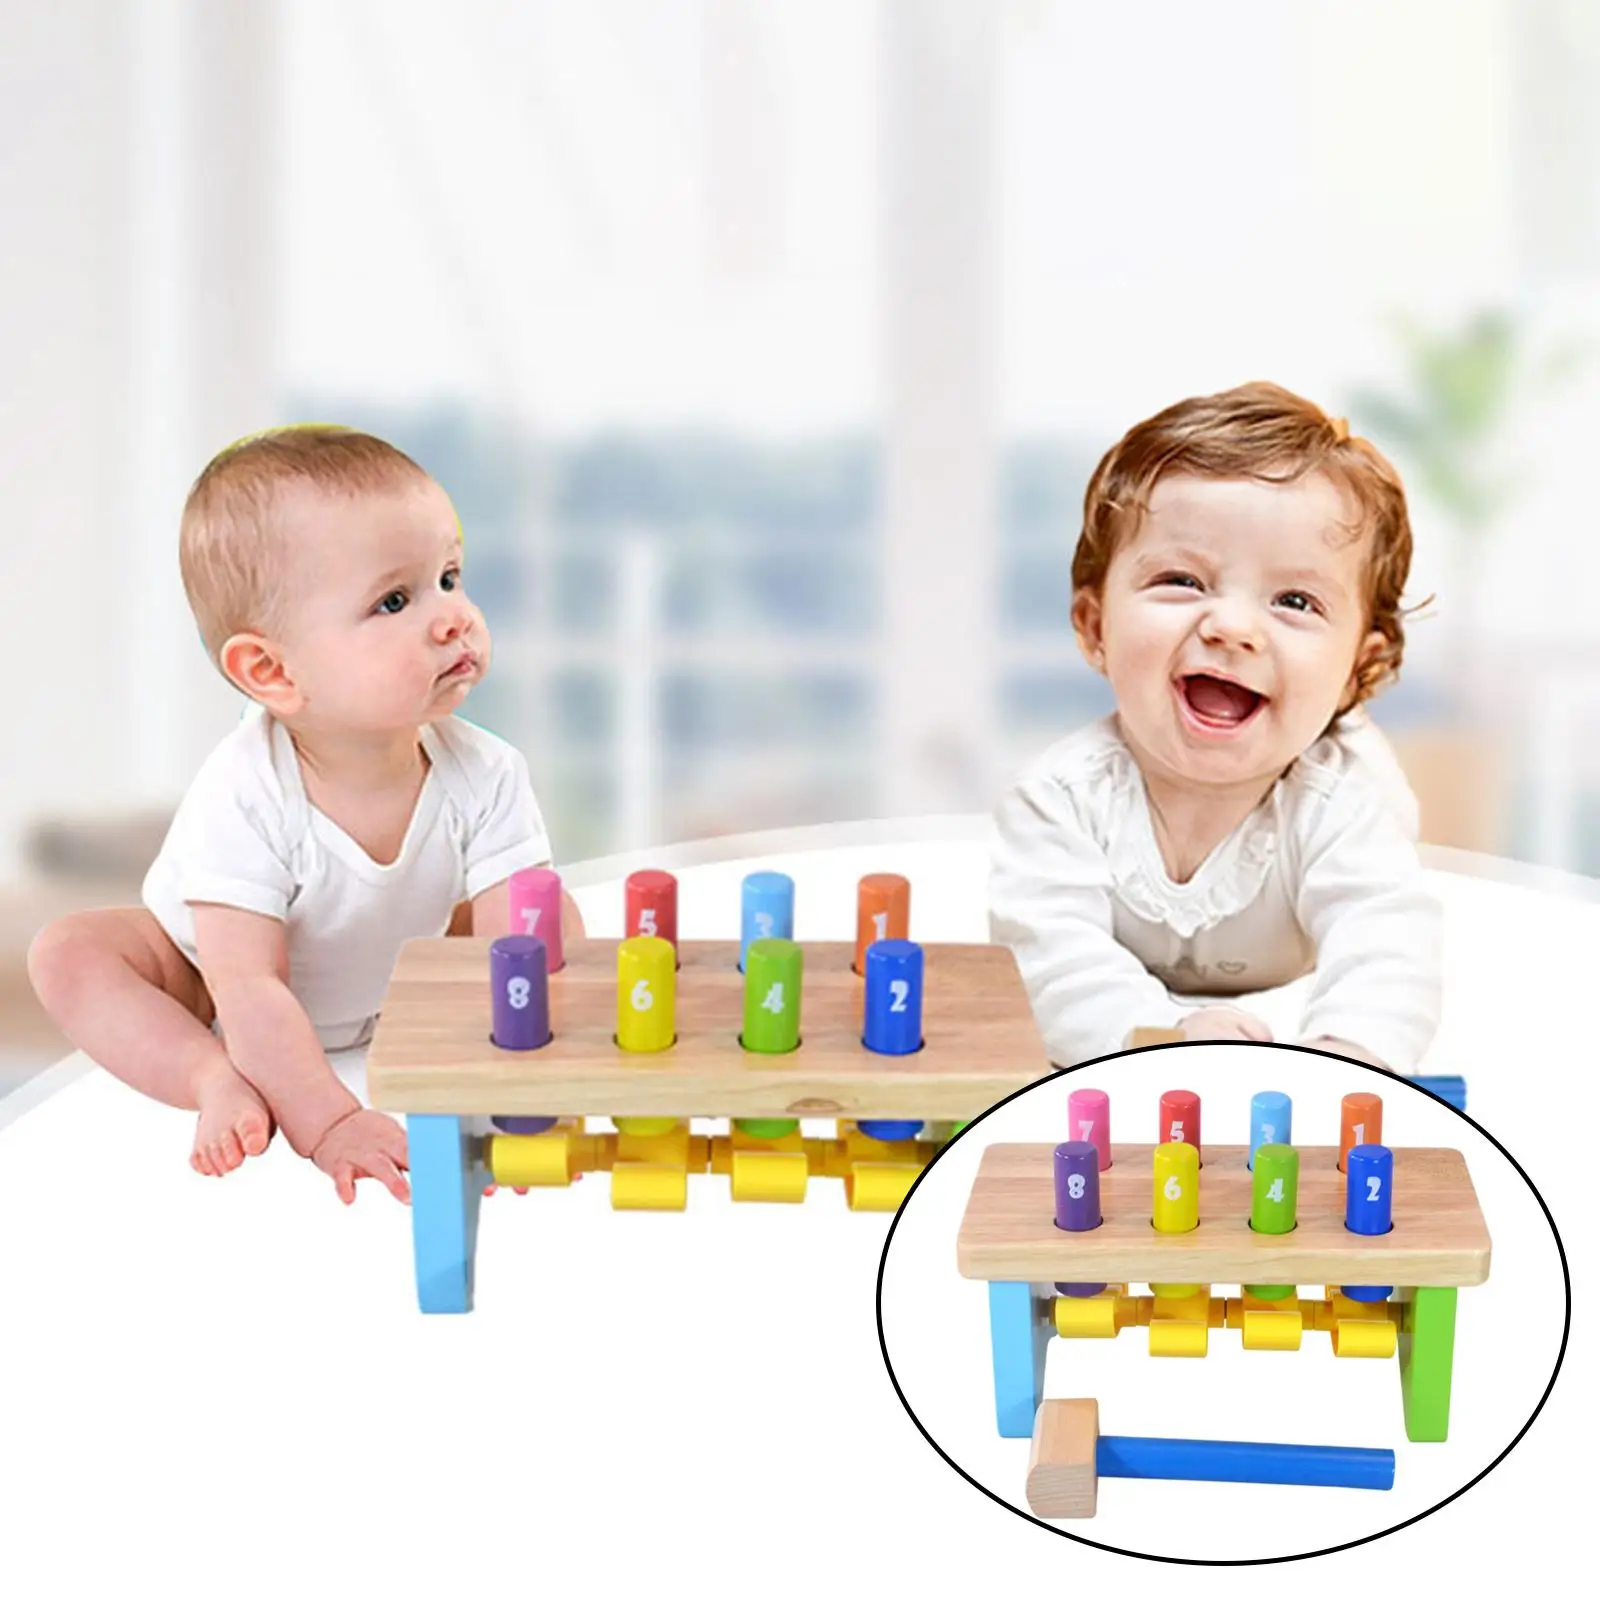 Hammer Toy - Pounding Bench Wooden Toy - Classic Hammer Toys for Toddlers and Kids 1-3 Years Old Develops Fine Motor Skills